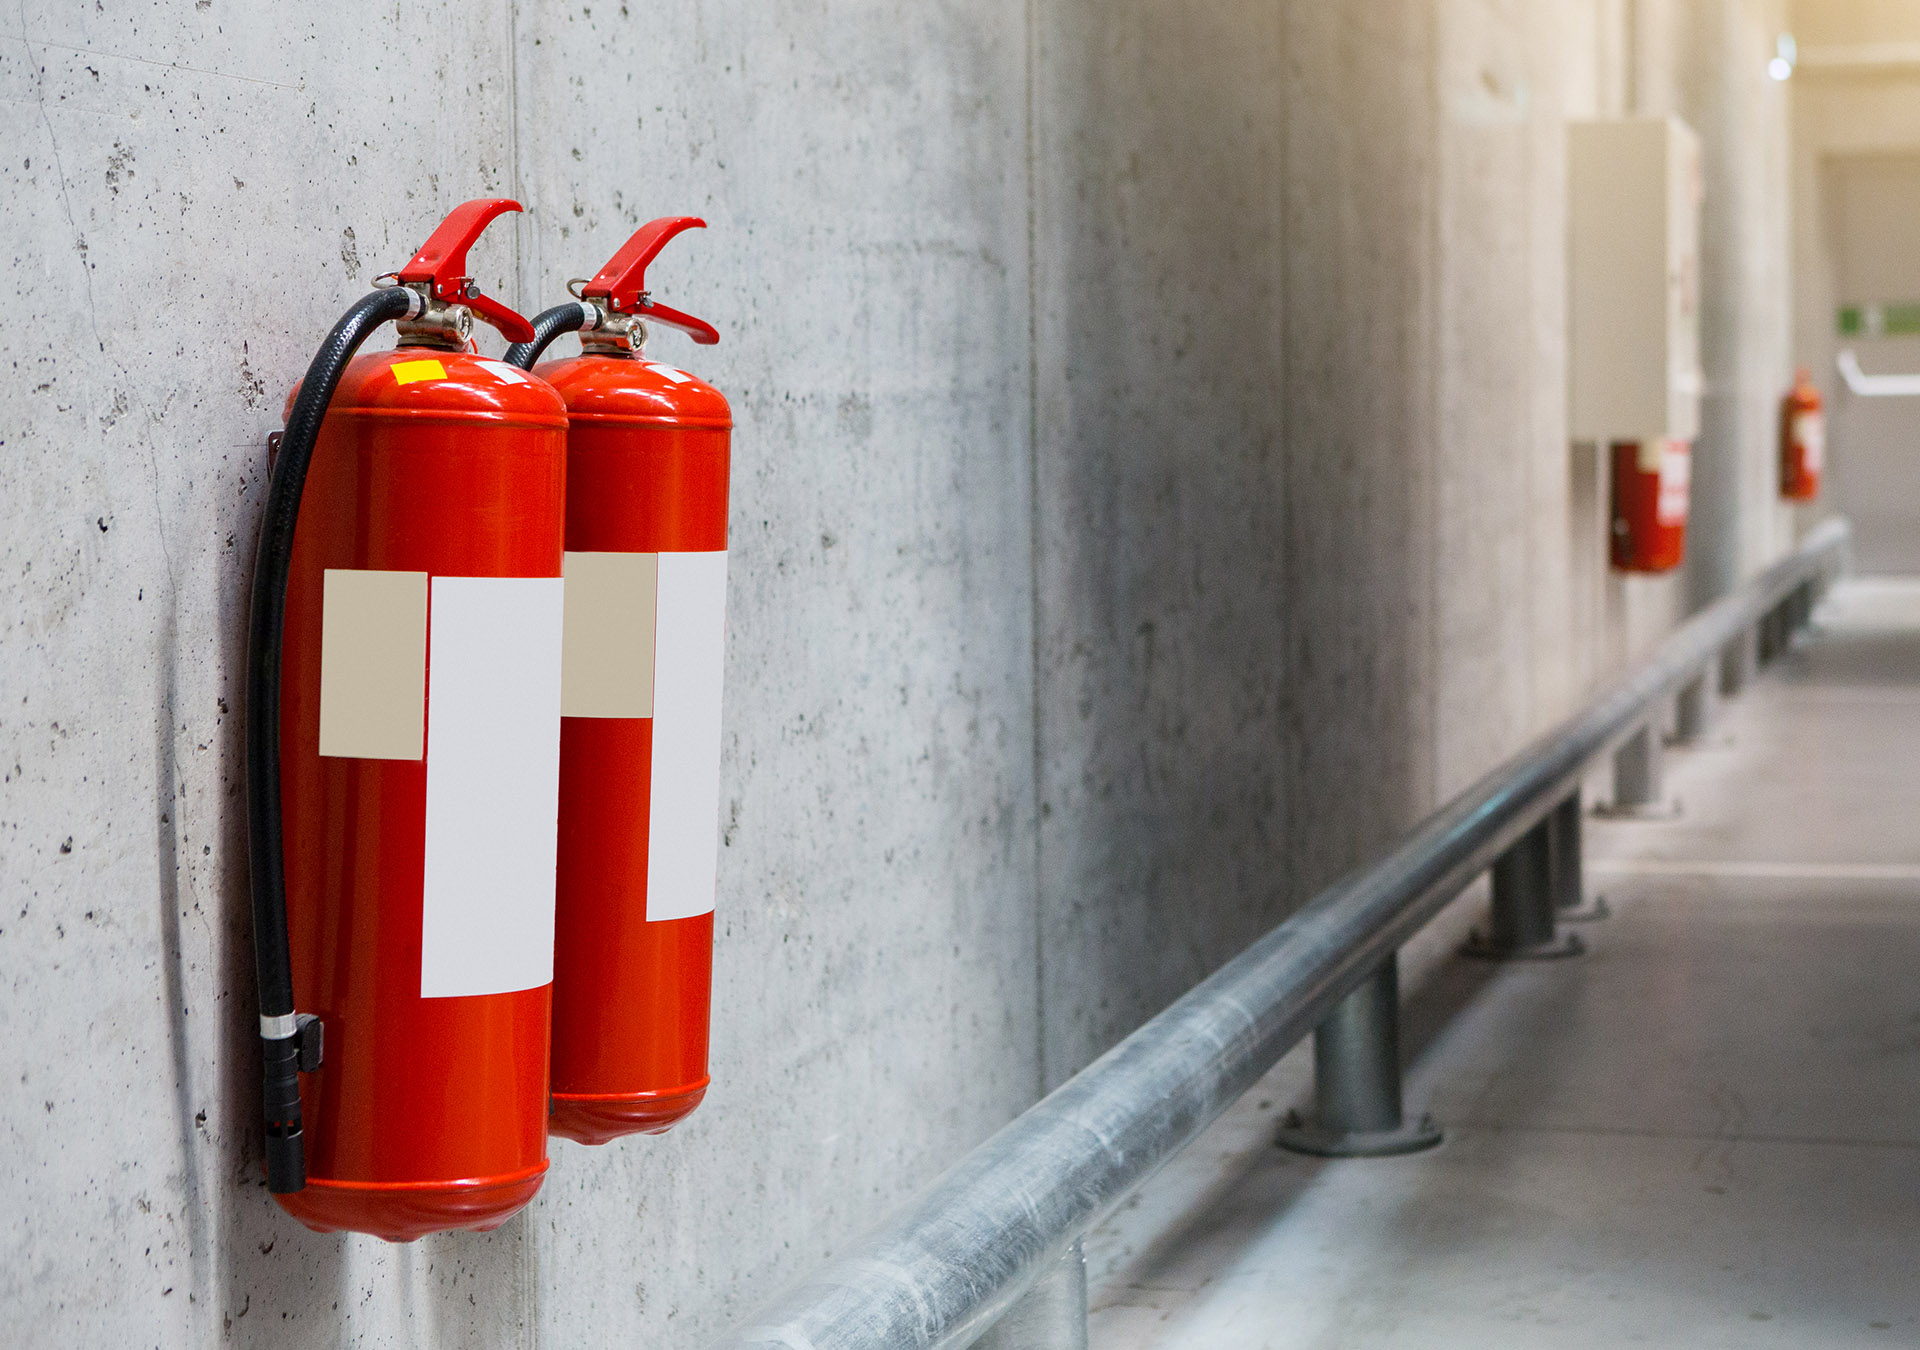 Fire-fighting and safety devices